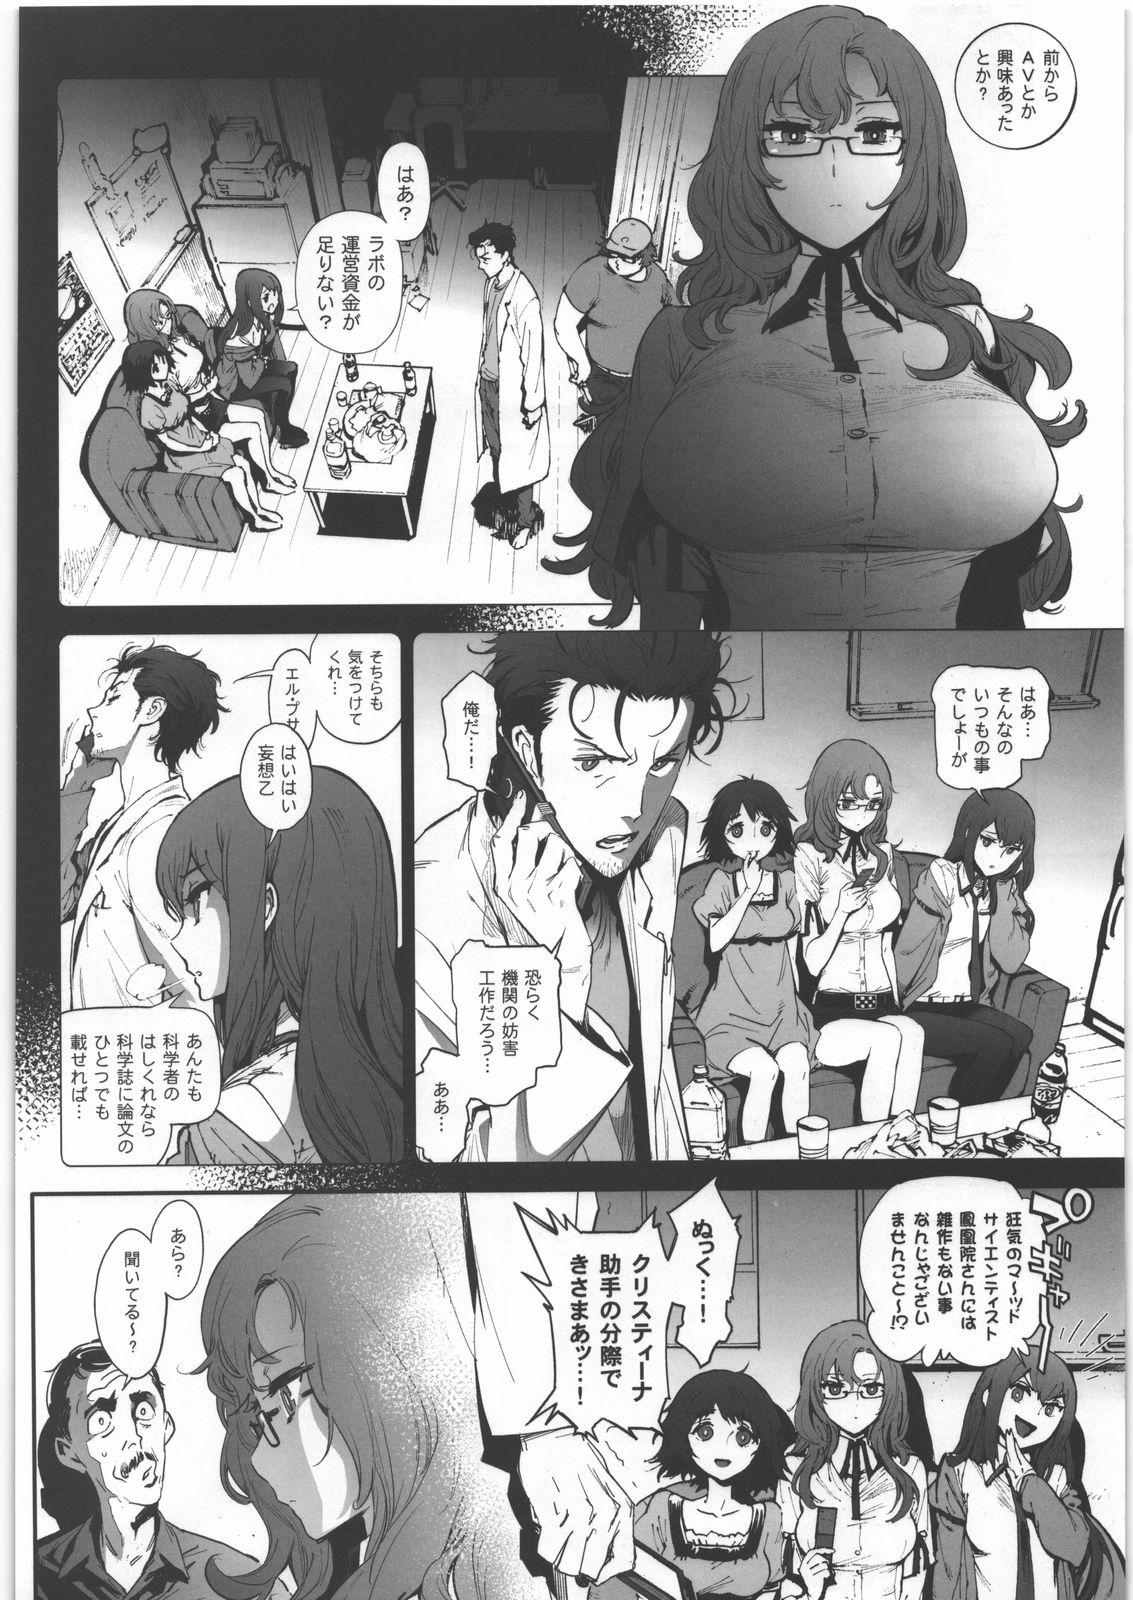 Dance Moeka's Gate - Steinsgate Top - Page 3